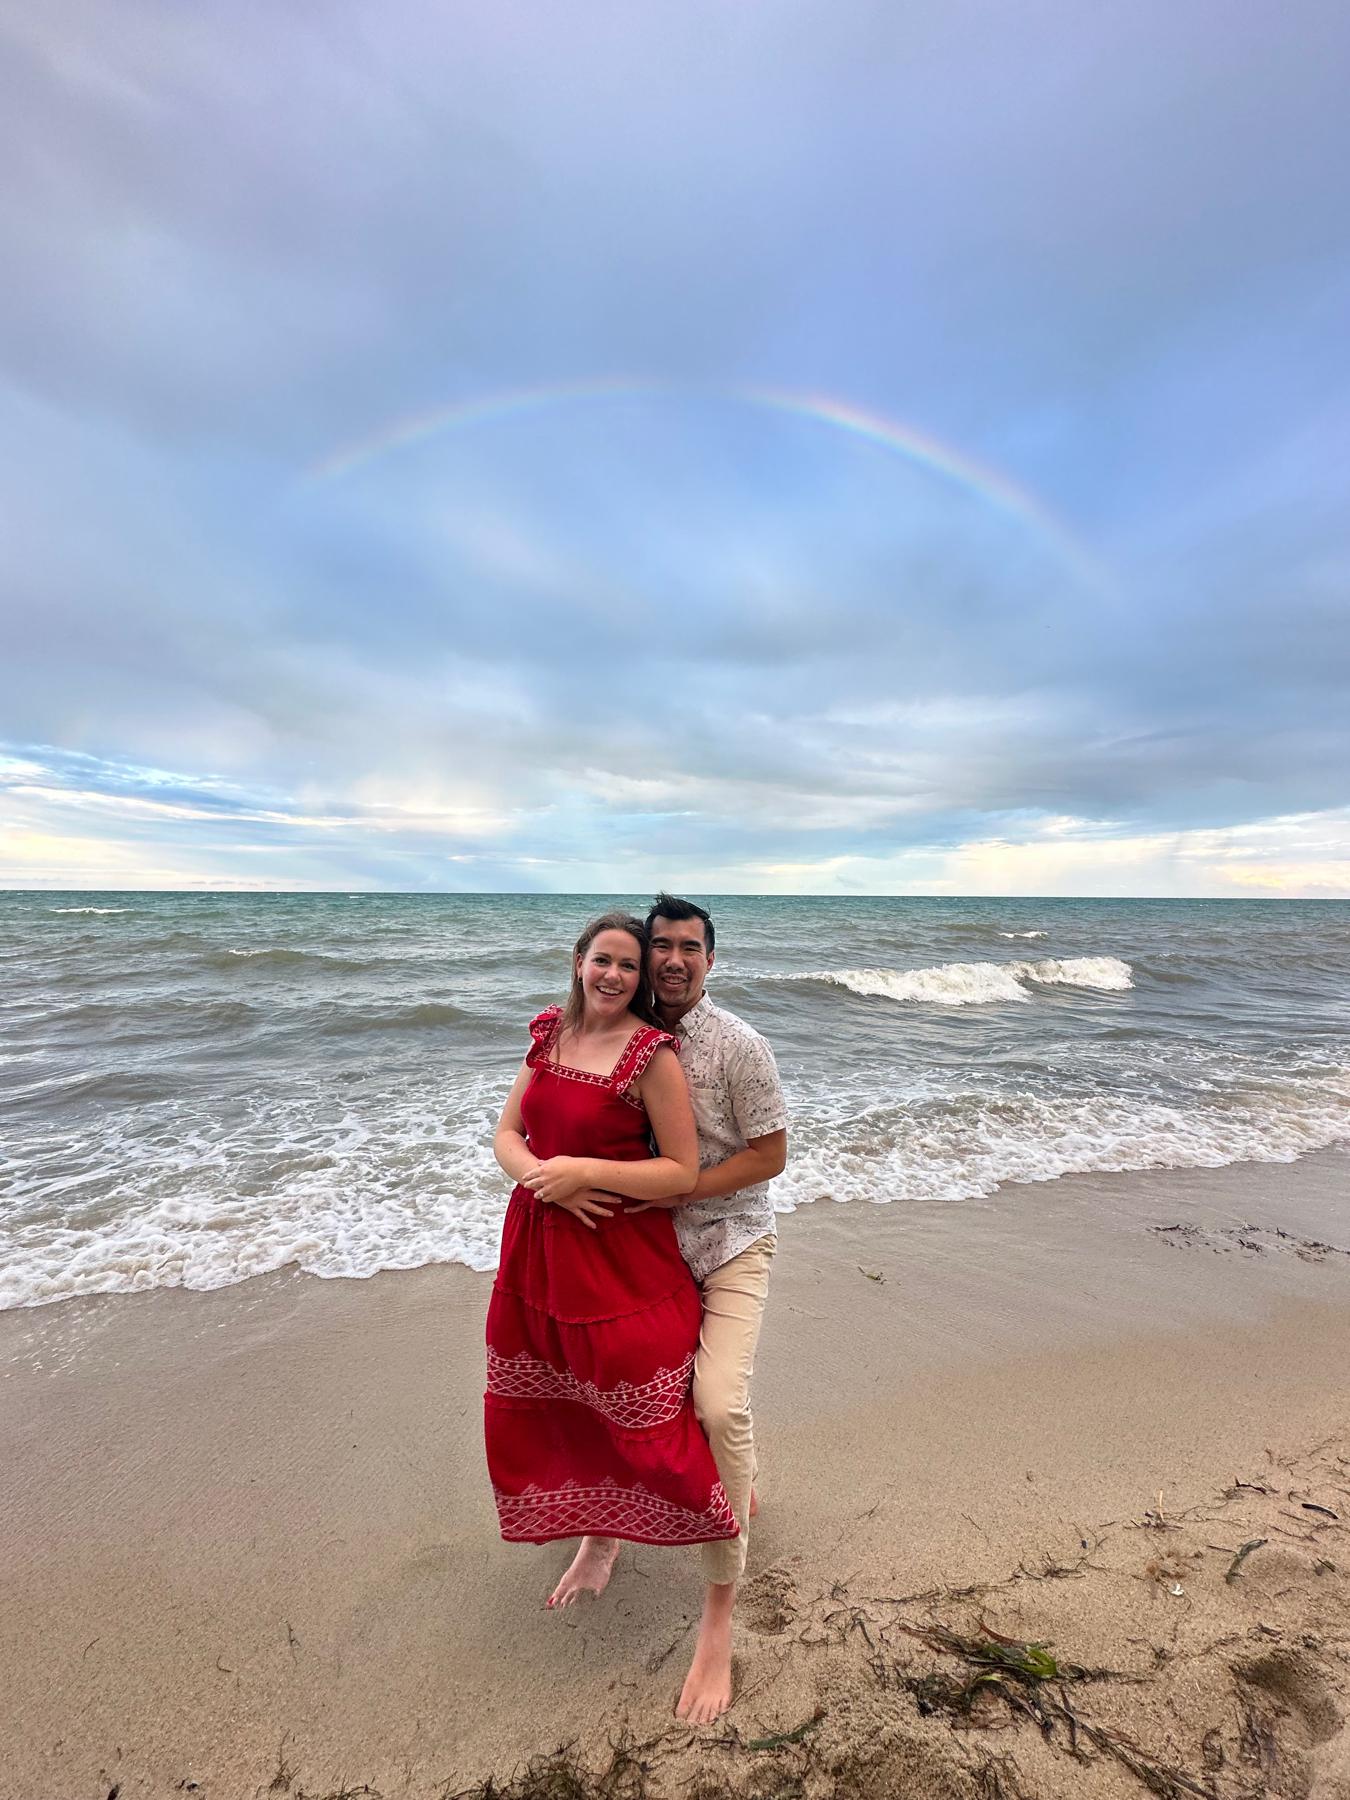 Engagement photo with a rainbow (photo credit to Grace Lee)!